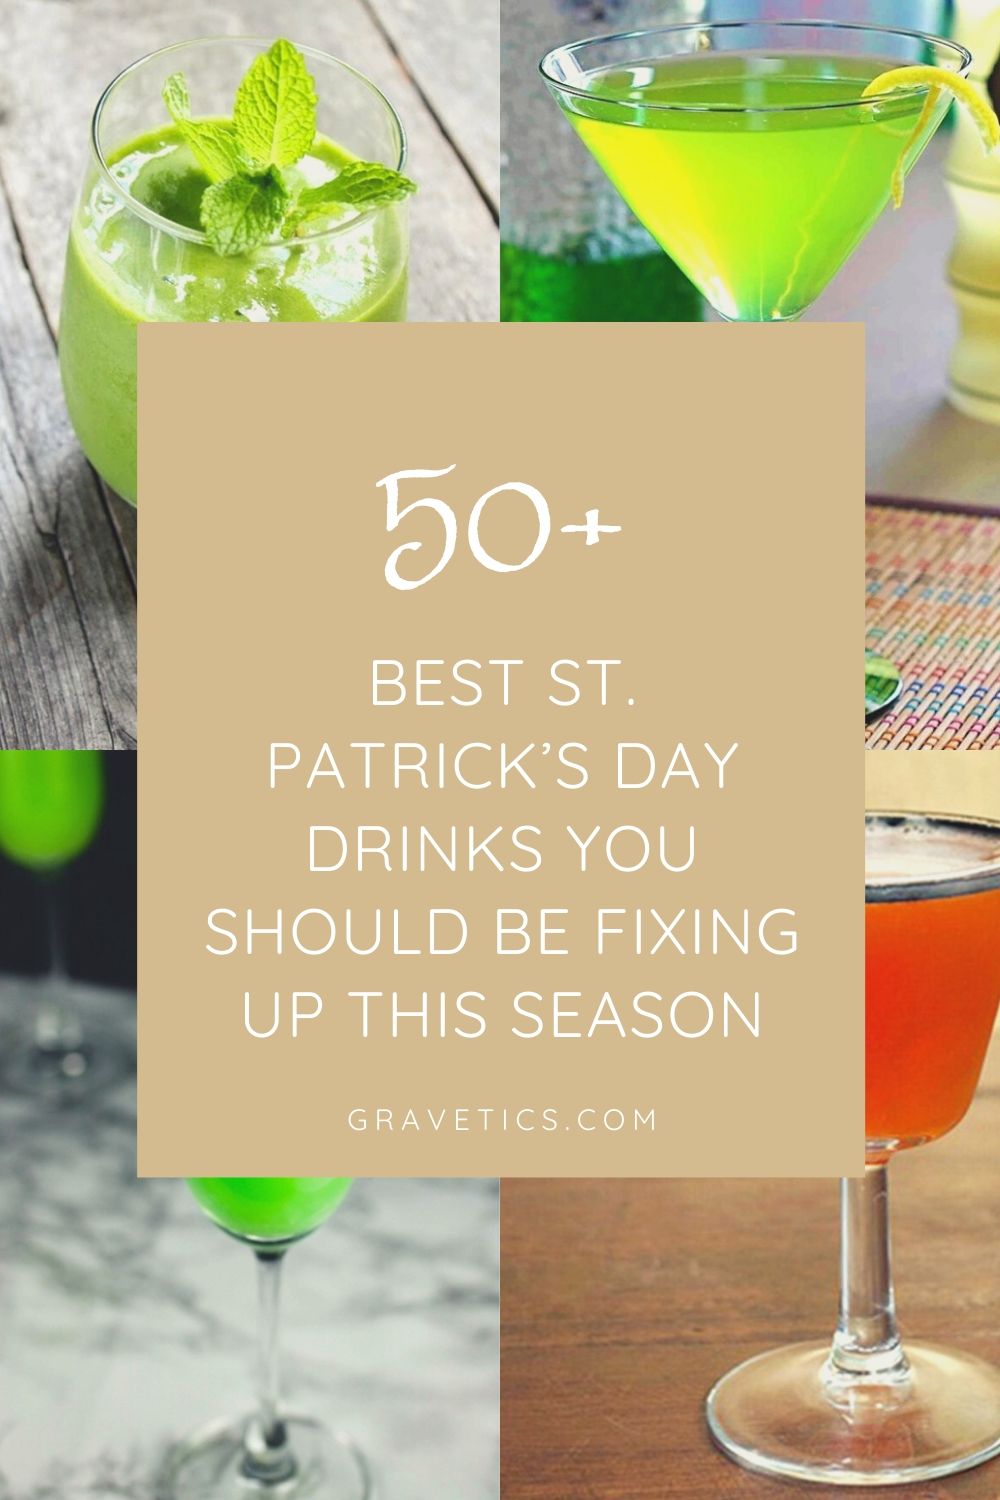 Best St. Patrick’s Day Drinks you should be fixing up this season